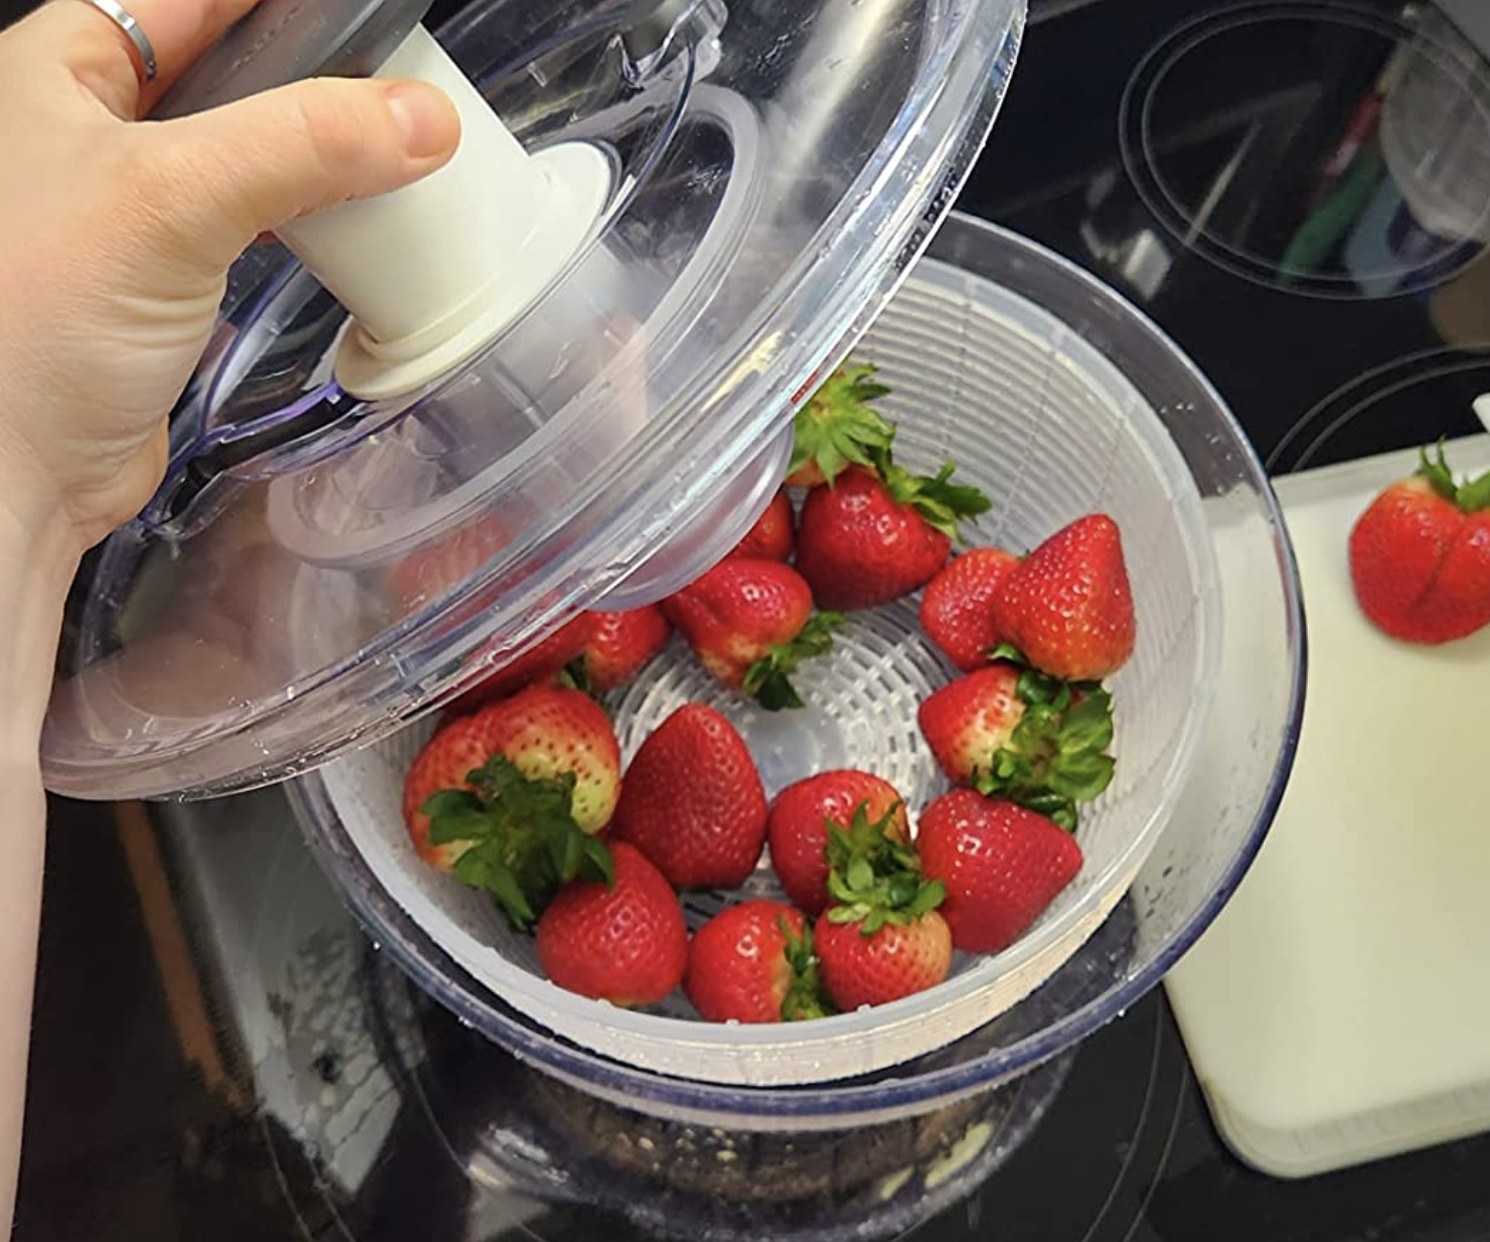 reviewer photo showing strawberries in the salad spinner